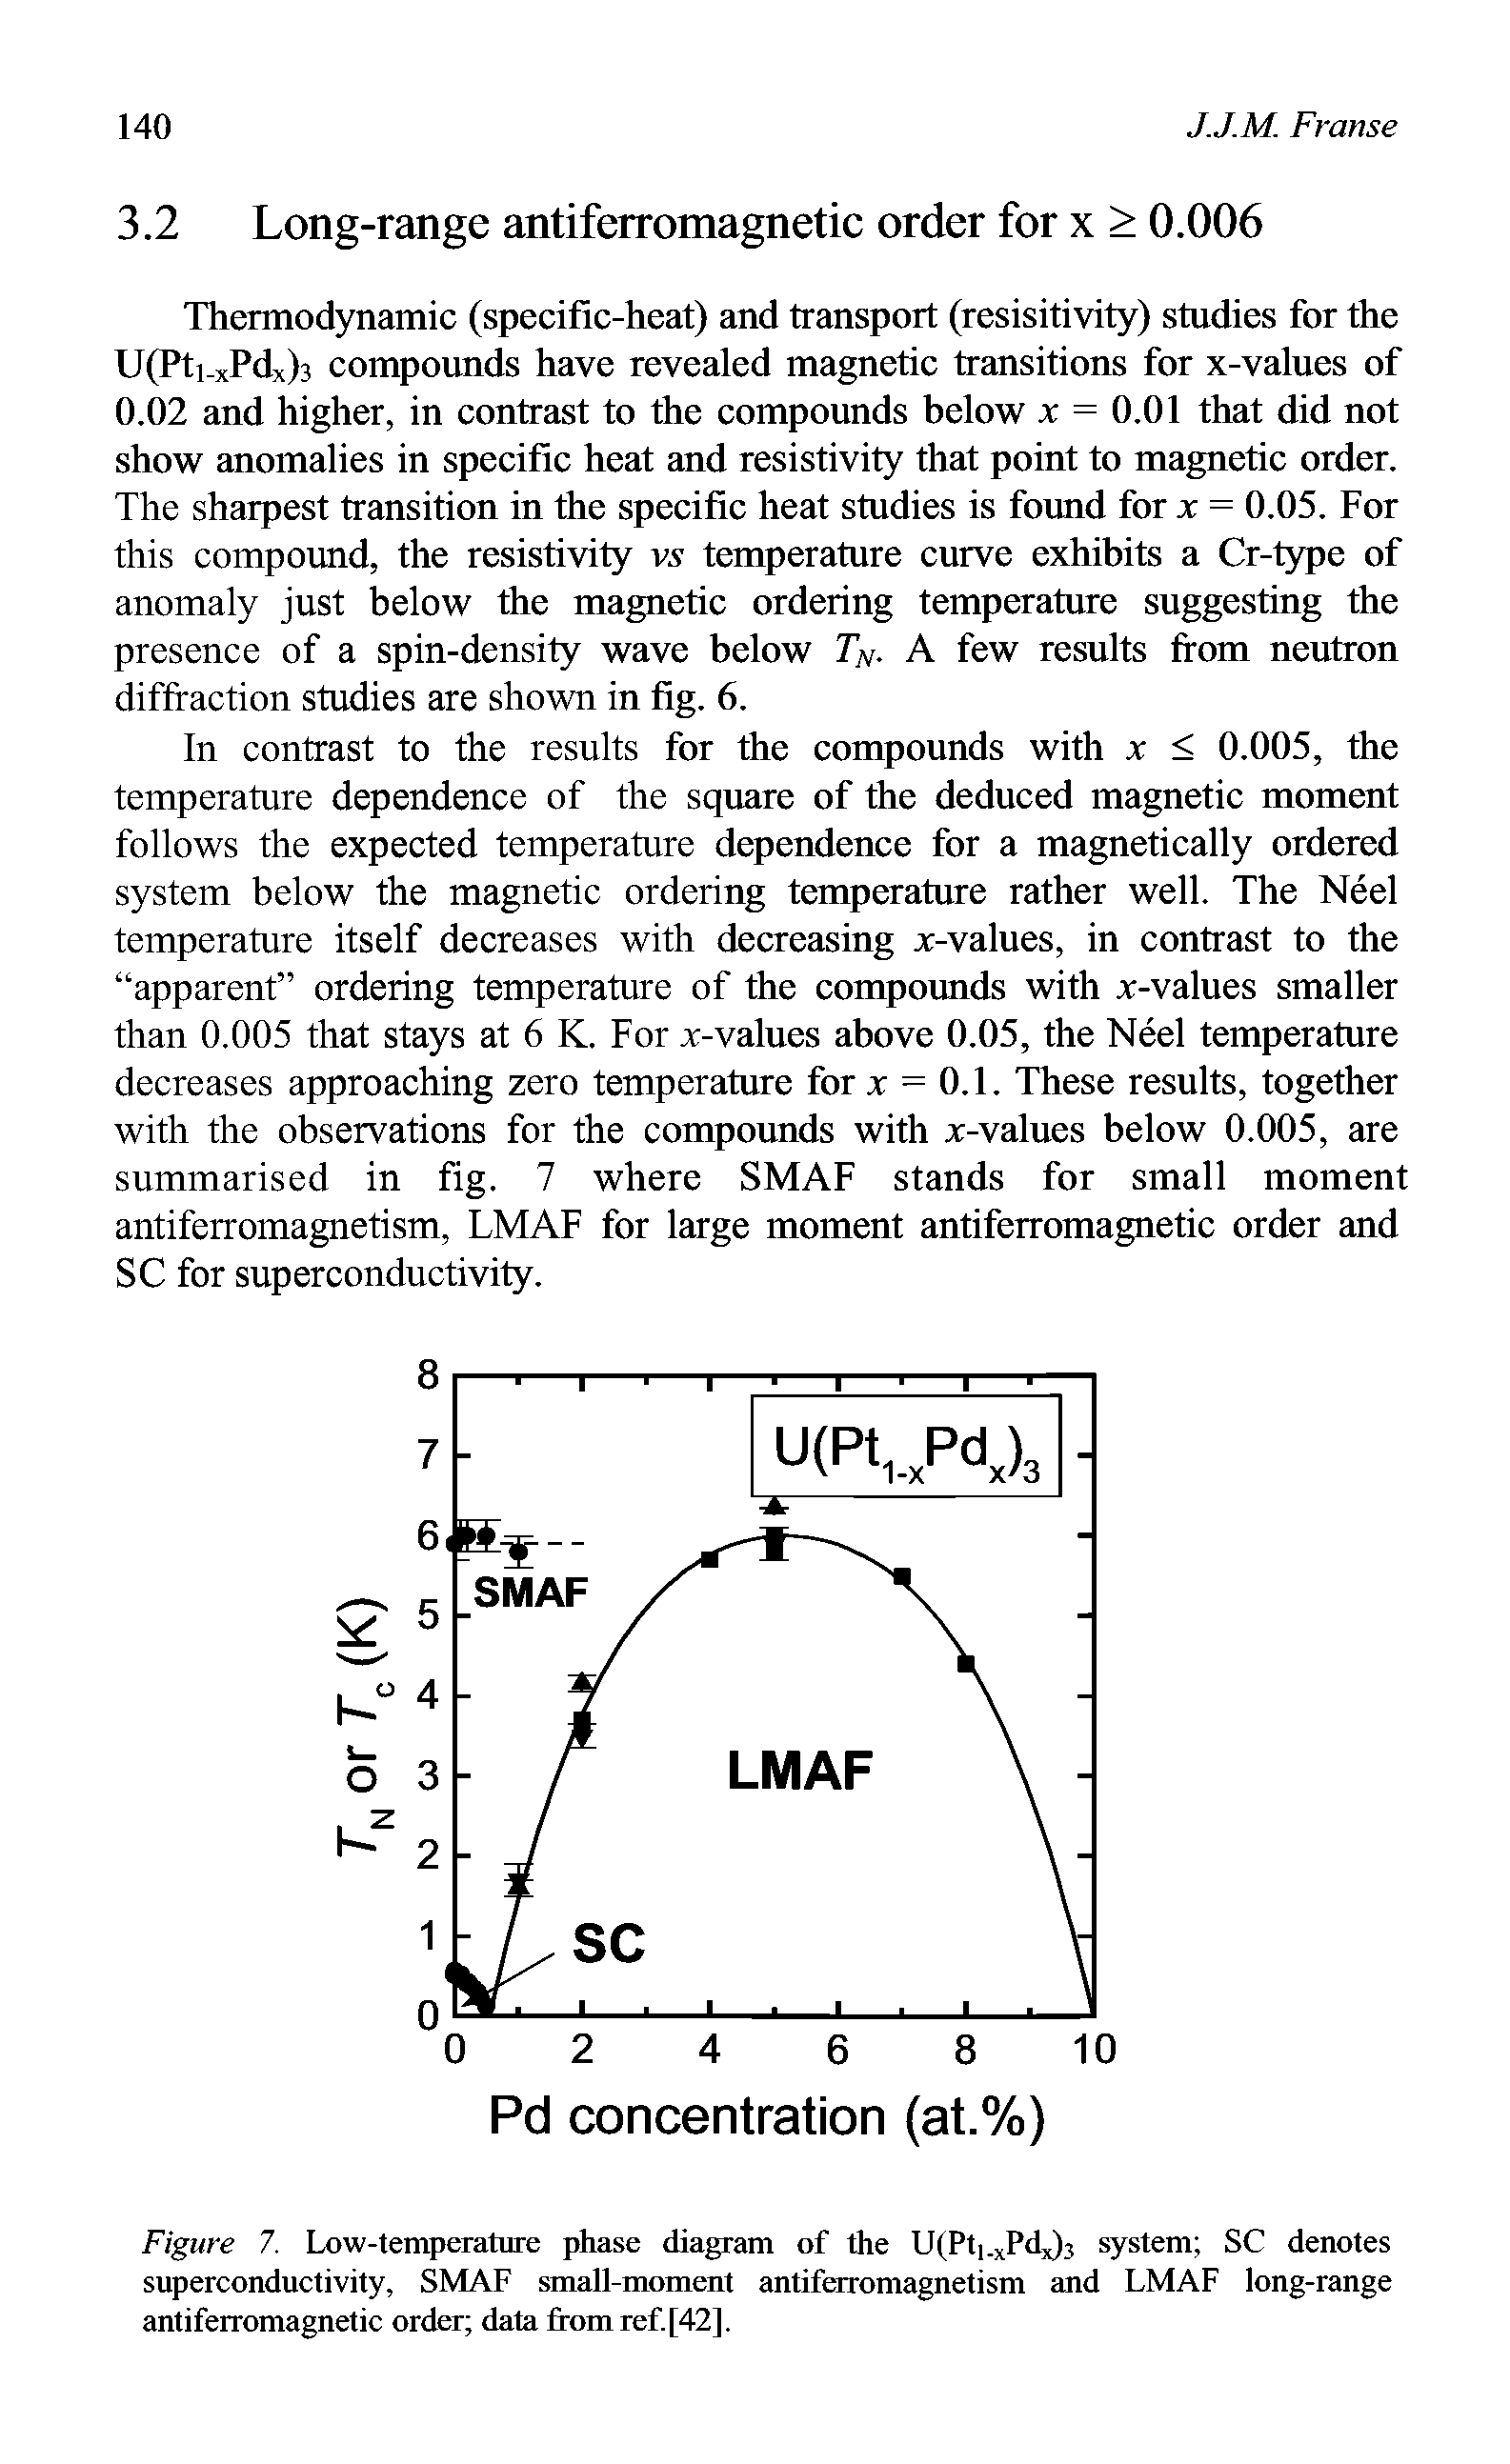 Figure 7. Low-temperature phase diagram of the UlPf.xPdJ., system SC denotes superconductivity, SMAF small-moment antiferromagnetism and LMAF long-range antiferromagnetic order data from ref. [42],...